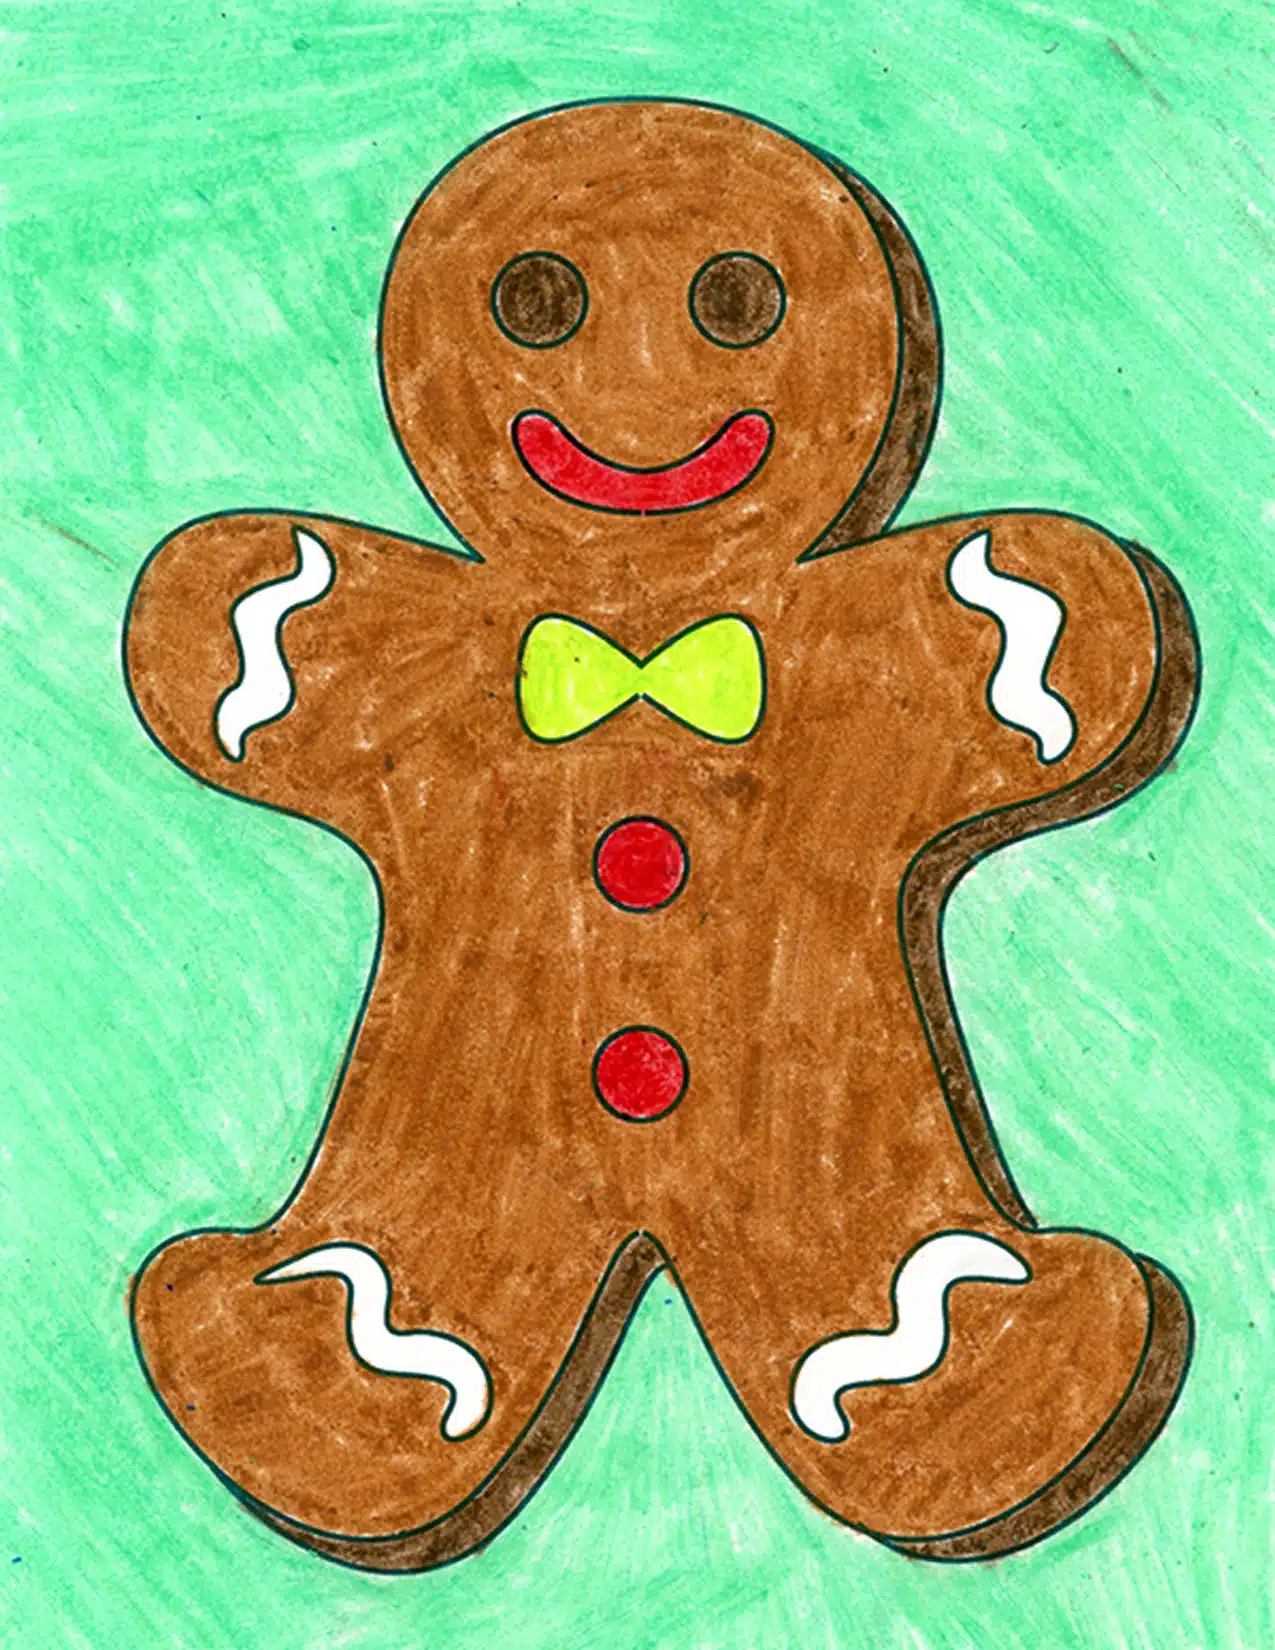 Gingerbread Man Running: Over 79 Royalty-Free Licensable Stock  Illustrations & Drawings | Shutterstock